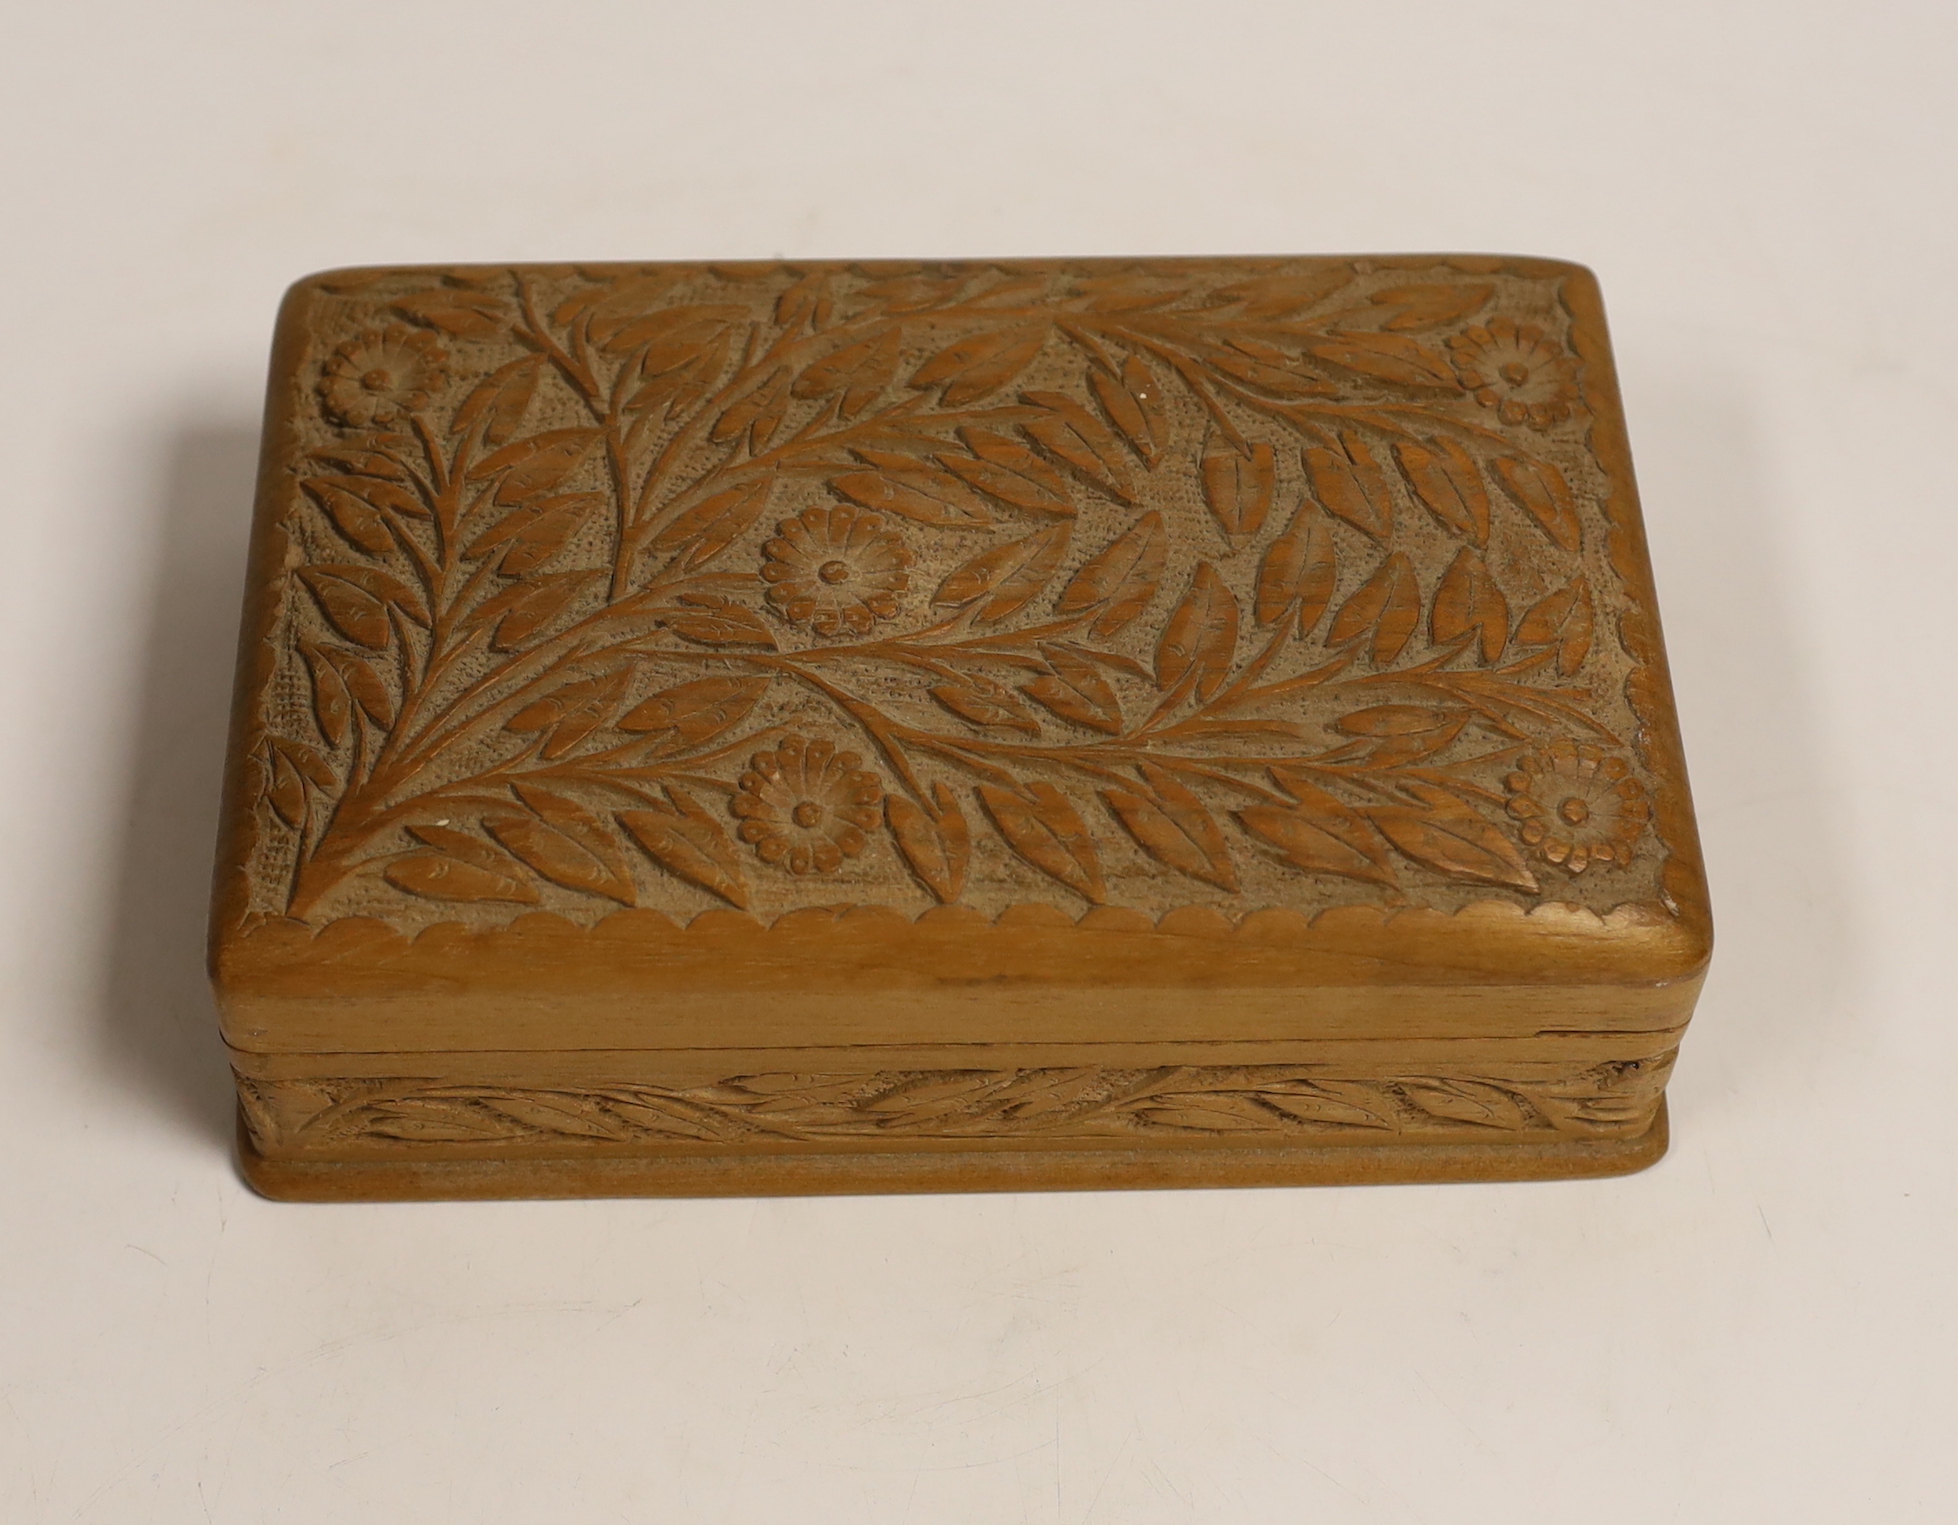 A group of Indian bronze sweet moulds, contained in a carved teak box